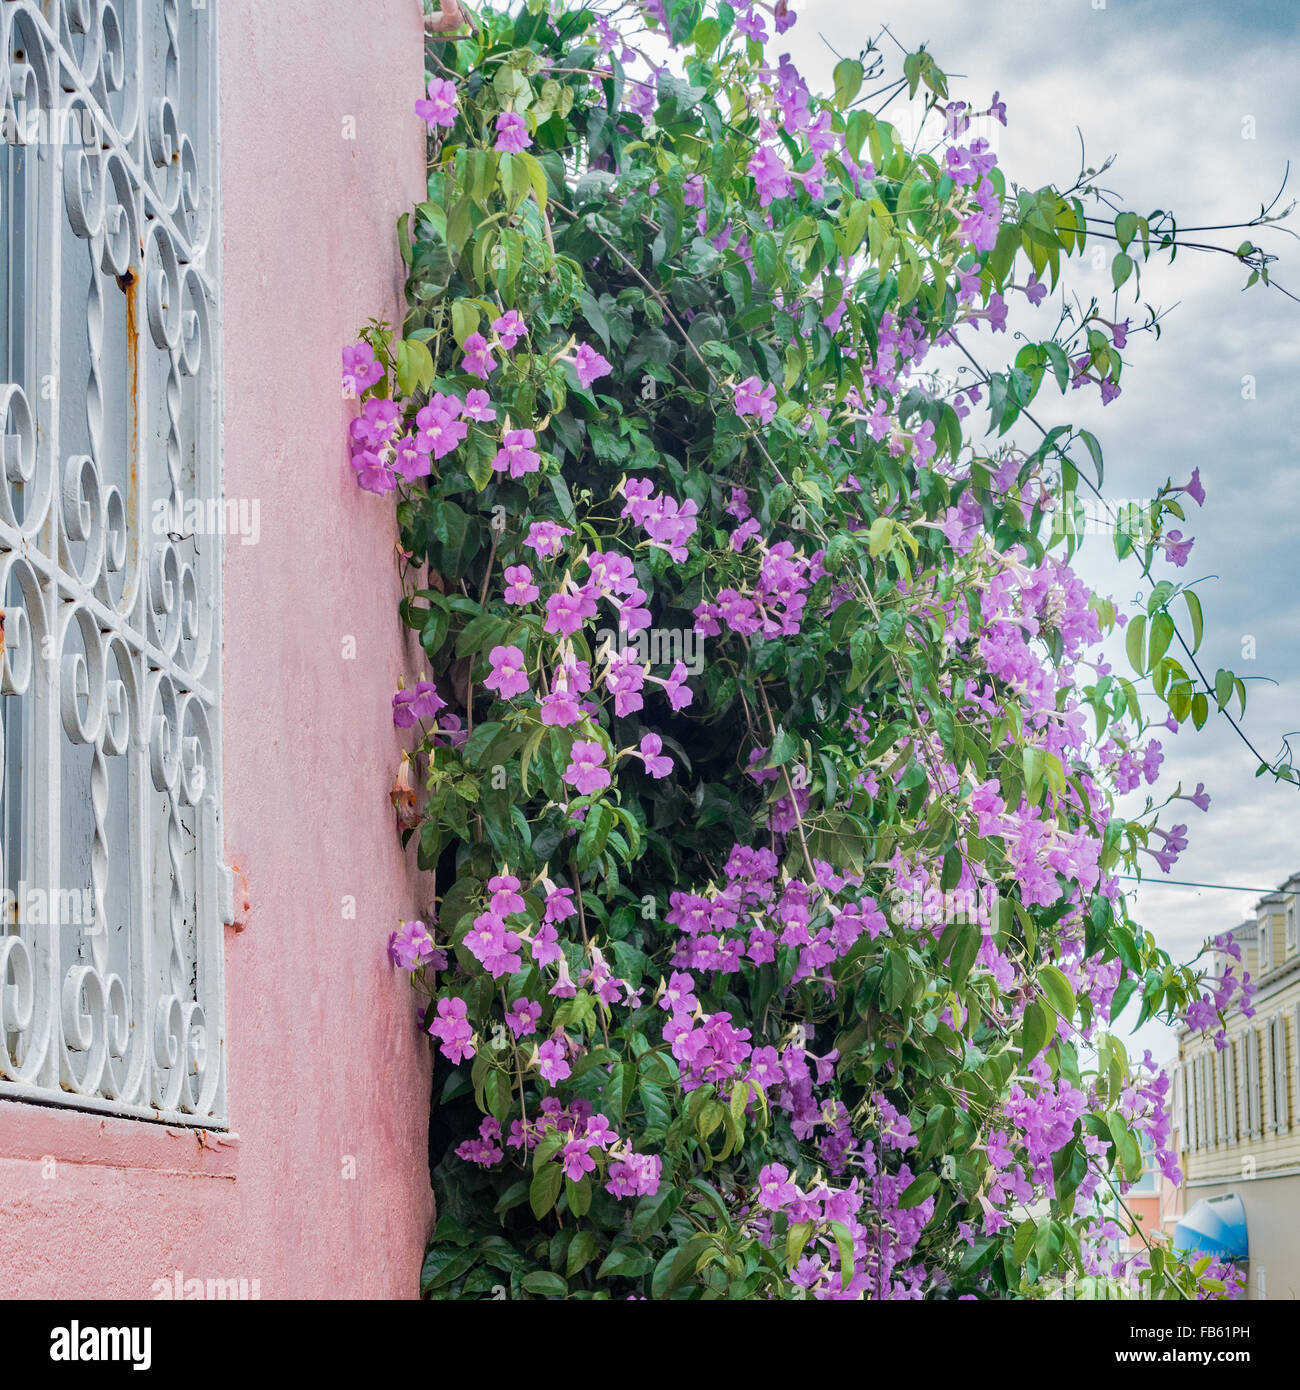 Probably Clytostoma Callistegioides, known as Lavender Trumpet Vine, growing on a wall in Christiansted, U.S. Virgin Islands. Stock Photo